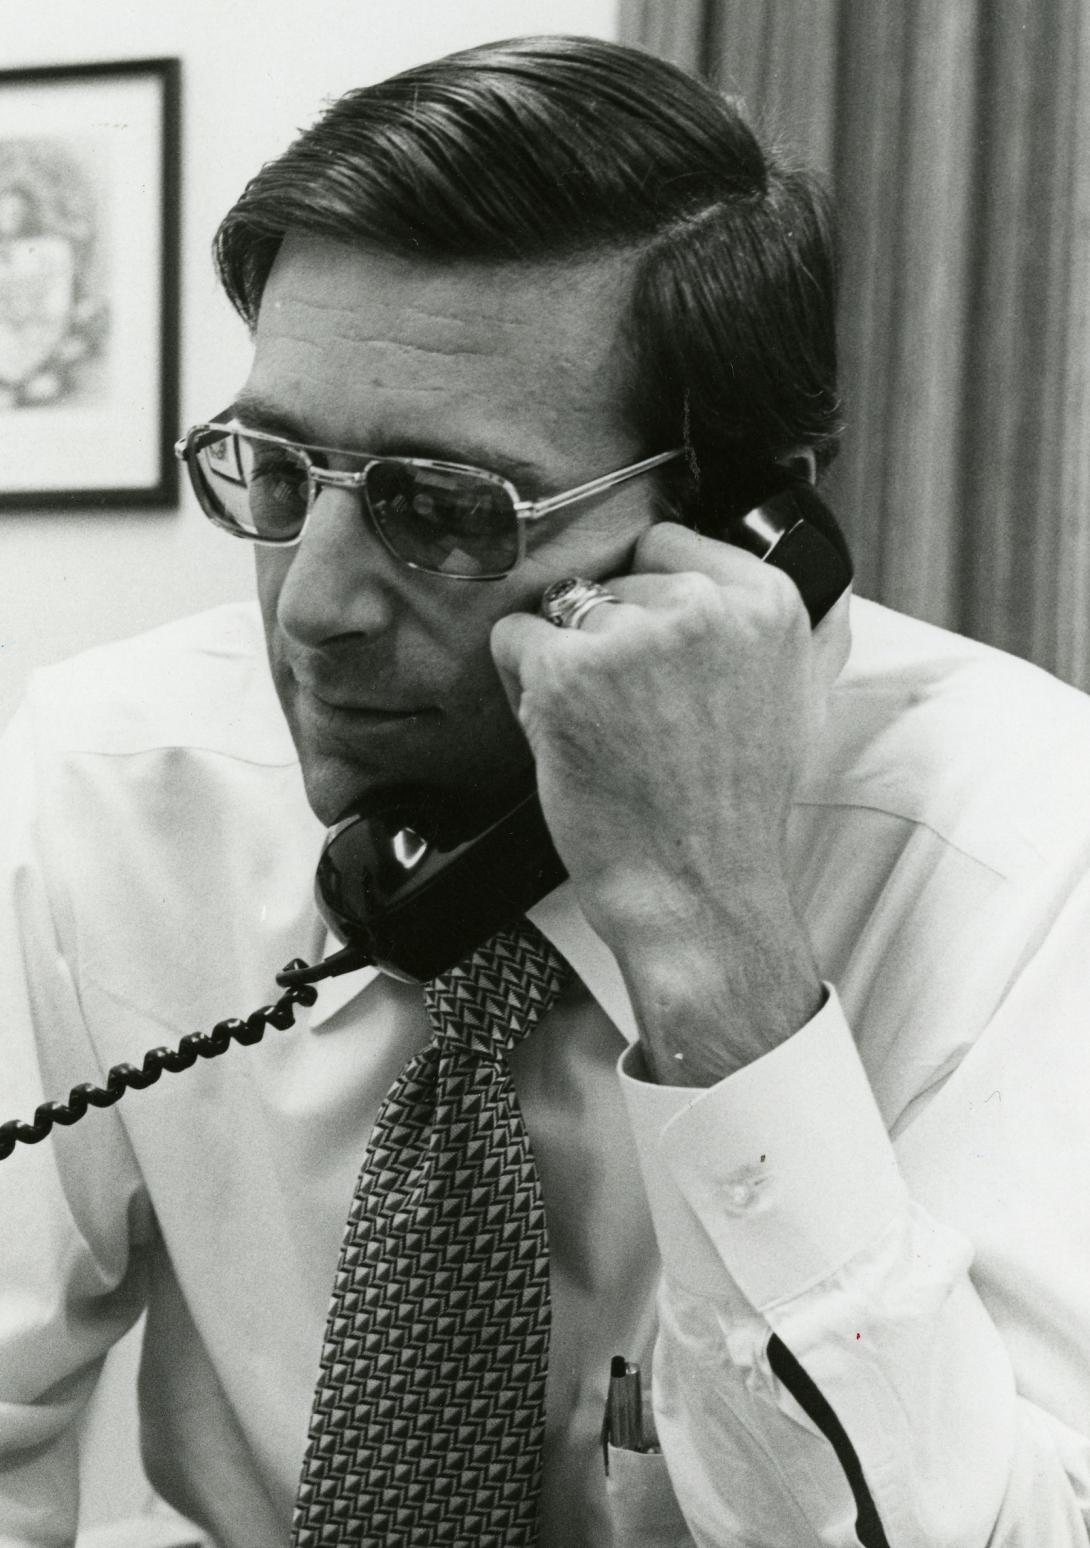 A man with glasses and a shirt and tie holds 70s era phone to his mouth and ear.